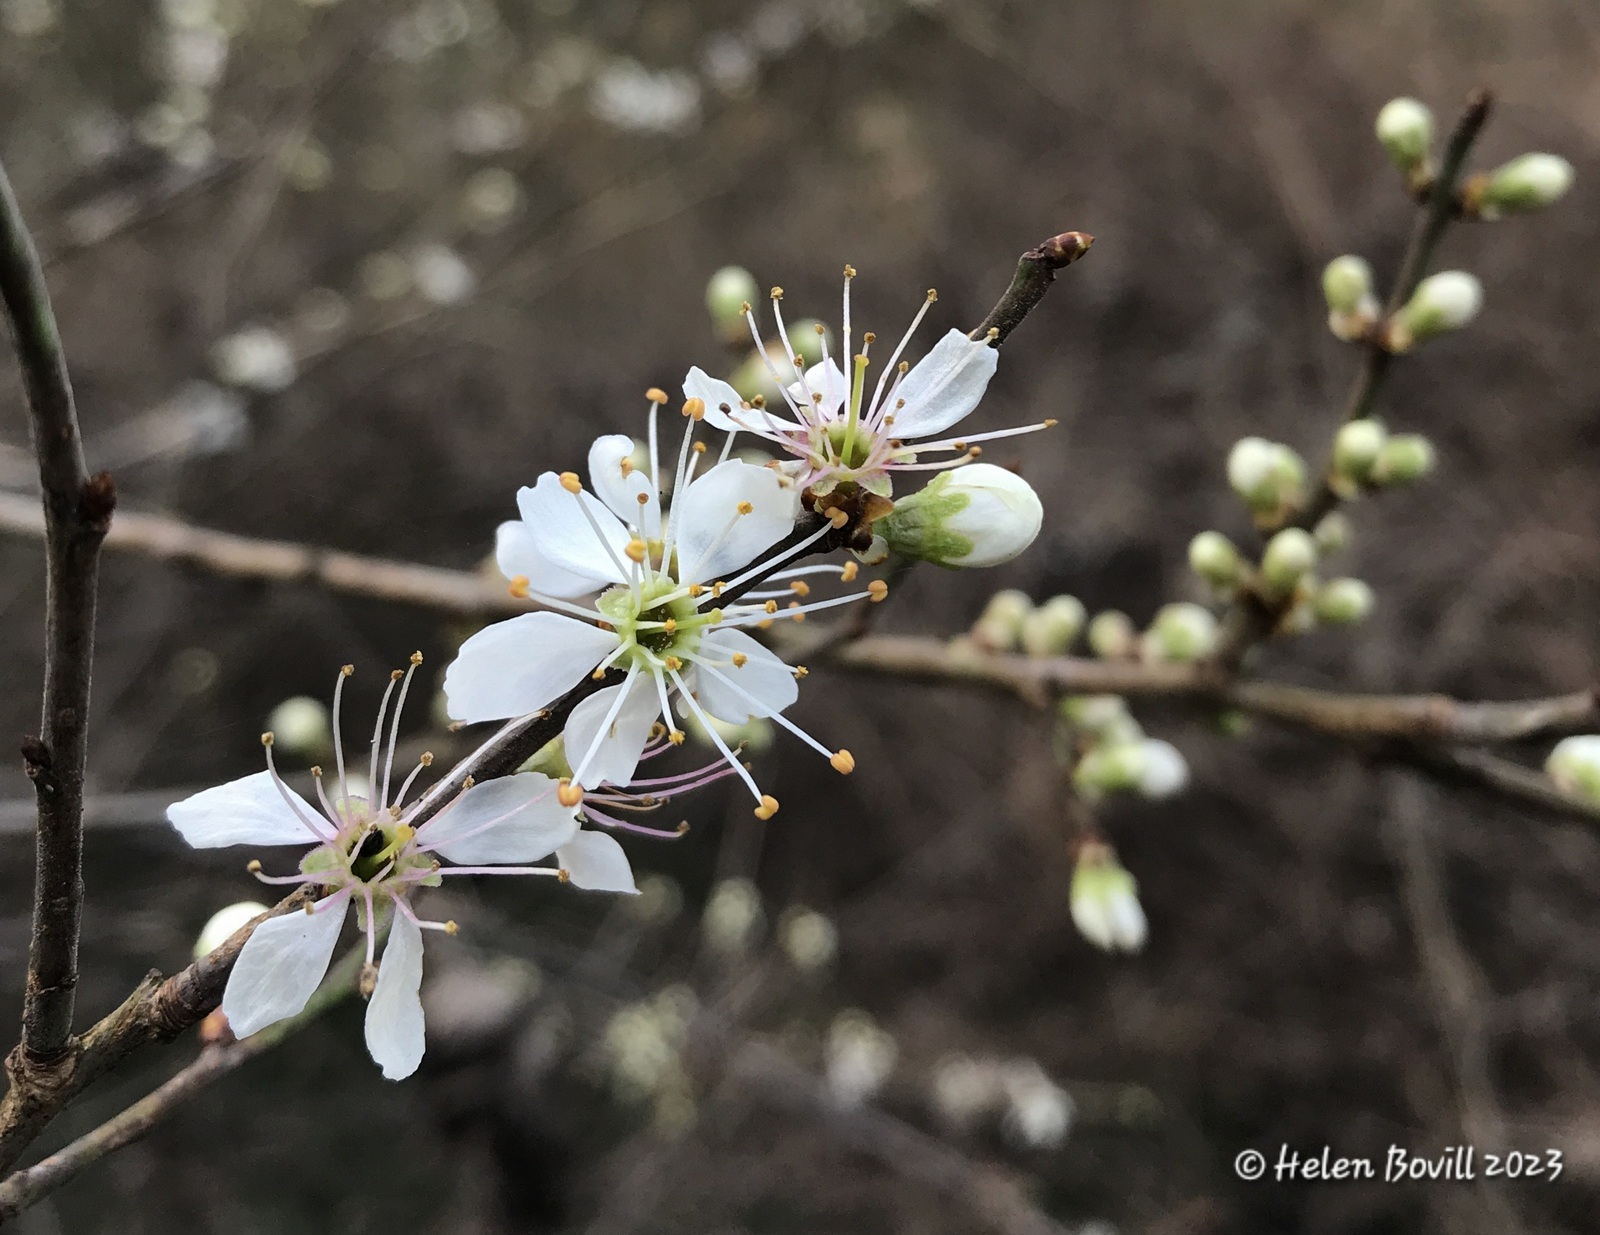 Blackthorn flowers and buds